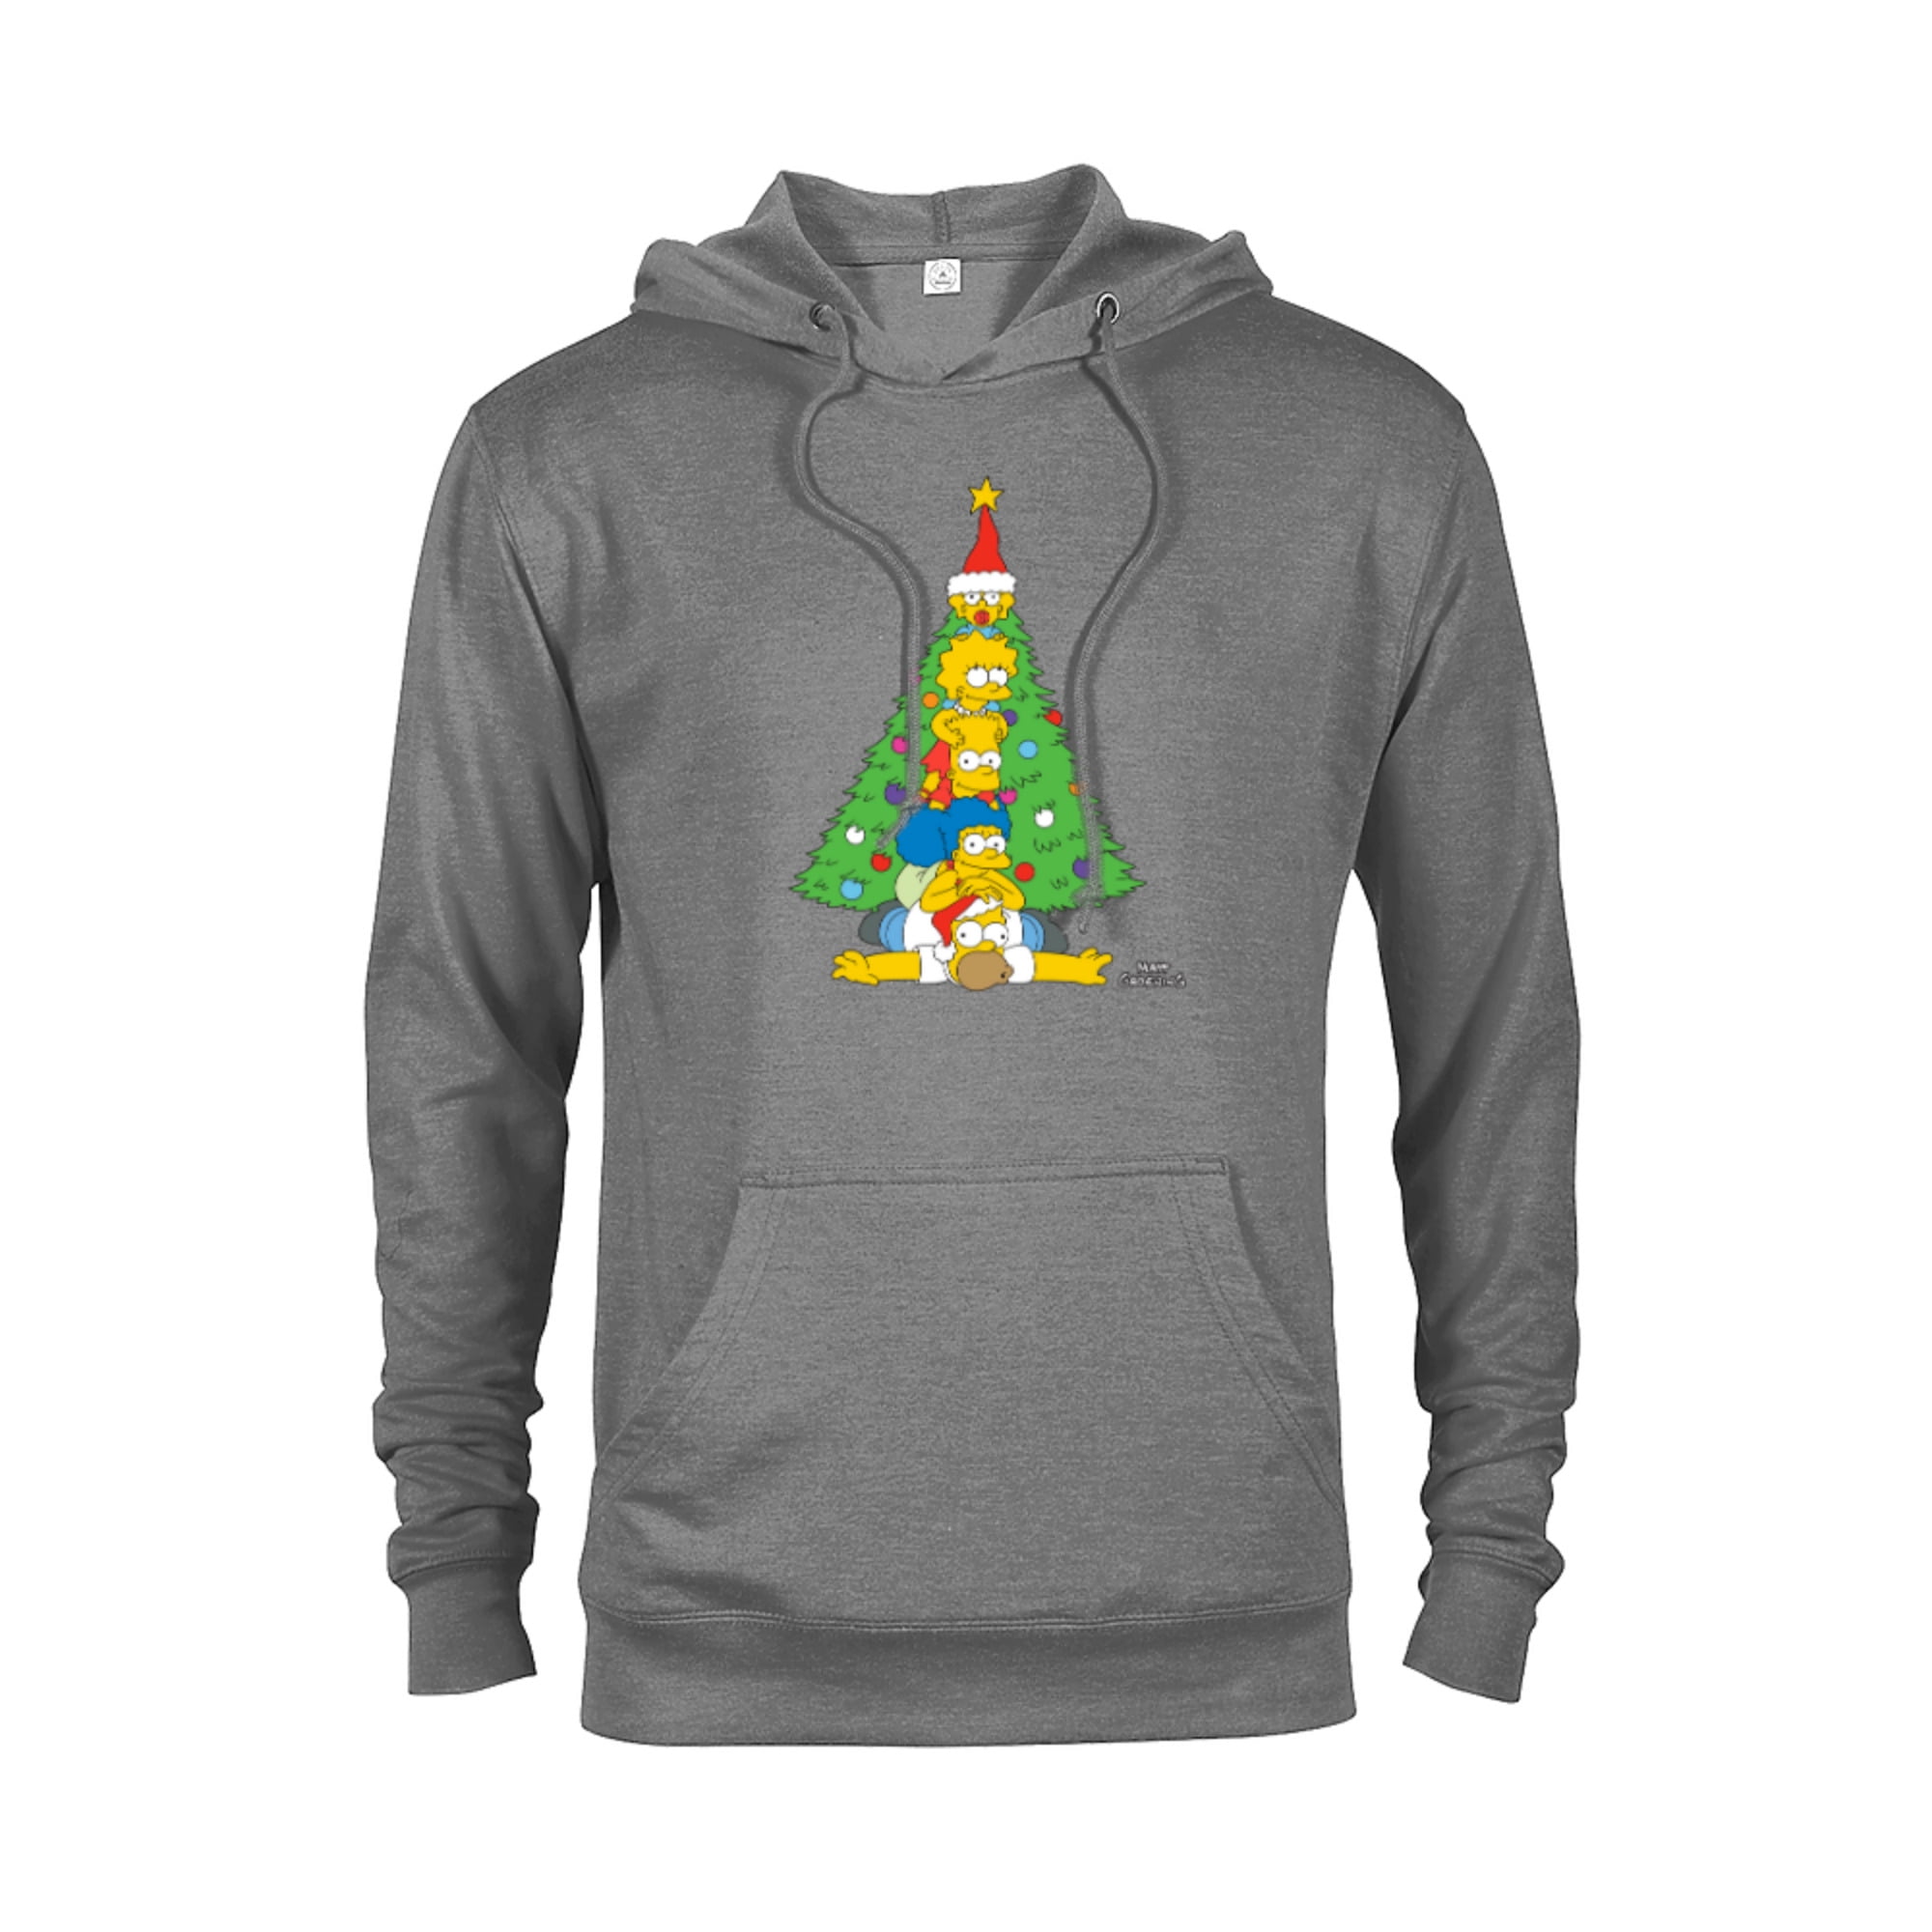 The Simpsons Family Christmas - Pullover Heather Customized-Graphite Tree – Hoodie Adults for Holiday